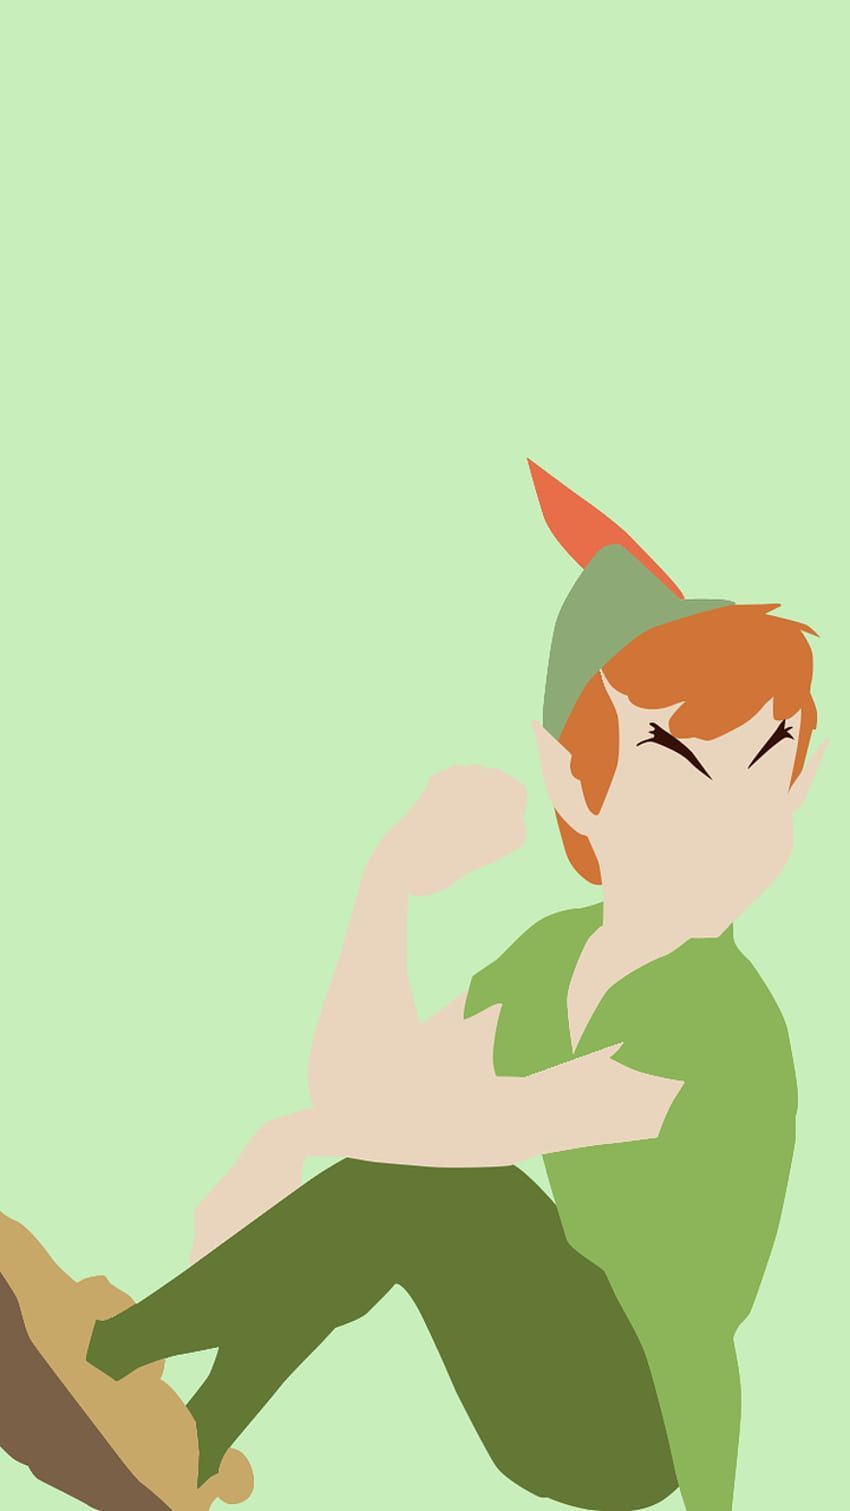 Peter Pan iPhone 8 wallpaper, by caitlin on the disney phone wallpapers subreddit - Peter Pan